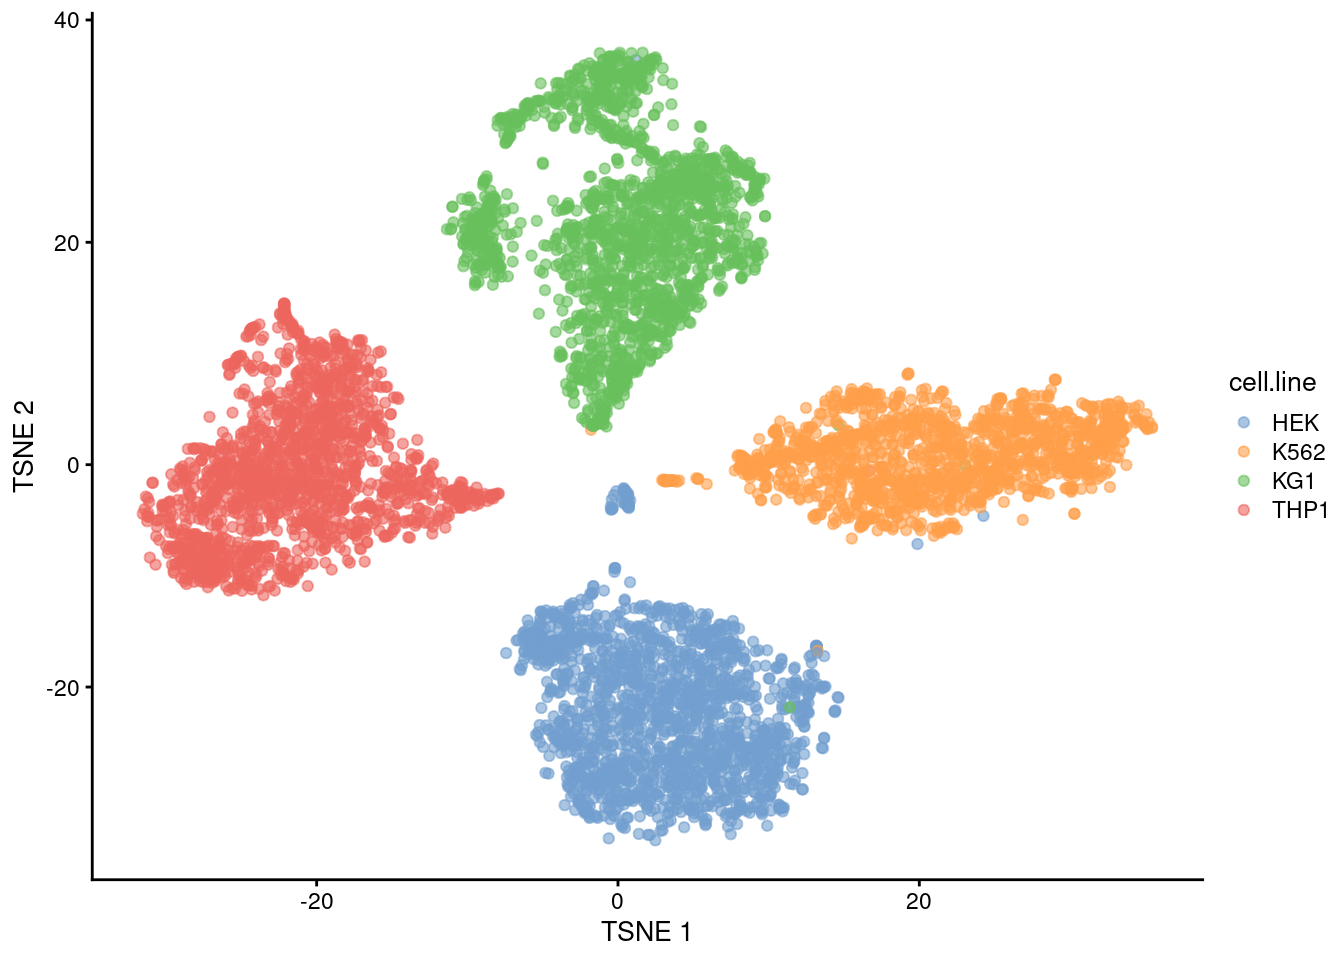 The usual $t$-SNE plot of the cell line mixture data, where each point is a cell and is colored by the cell line corresponding to its sample of origin.